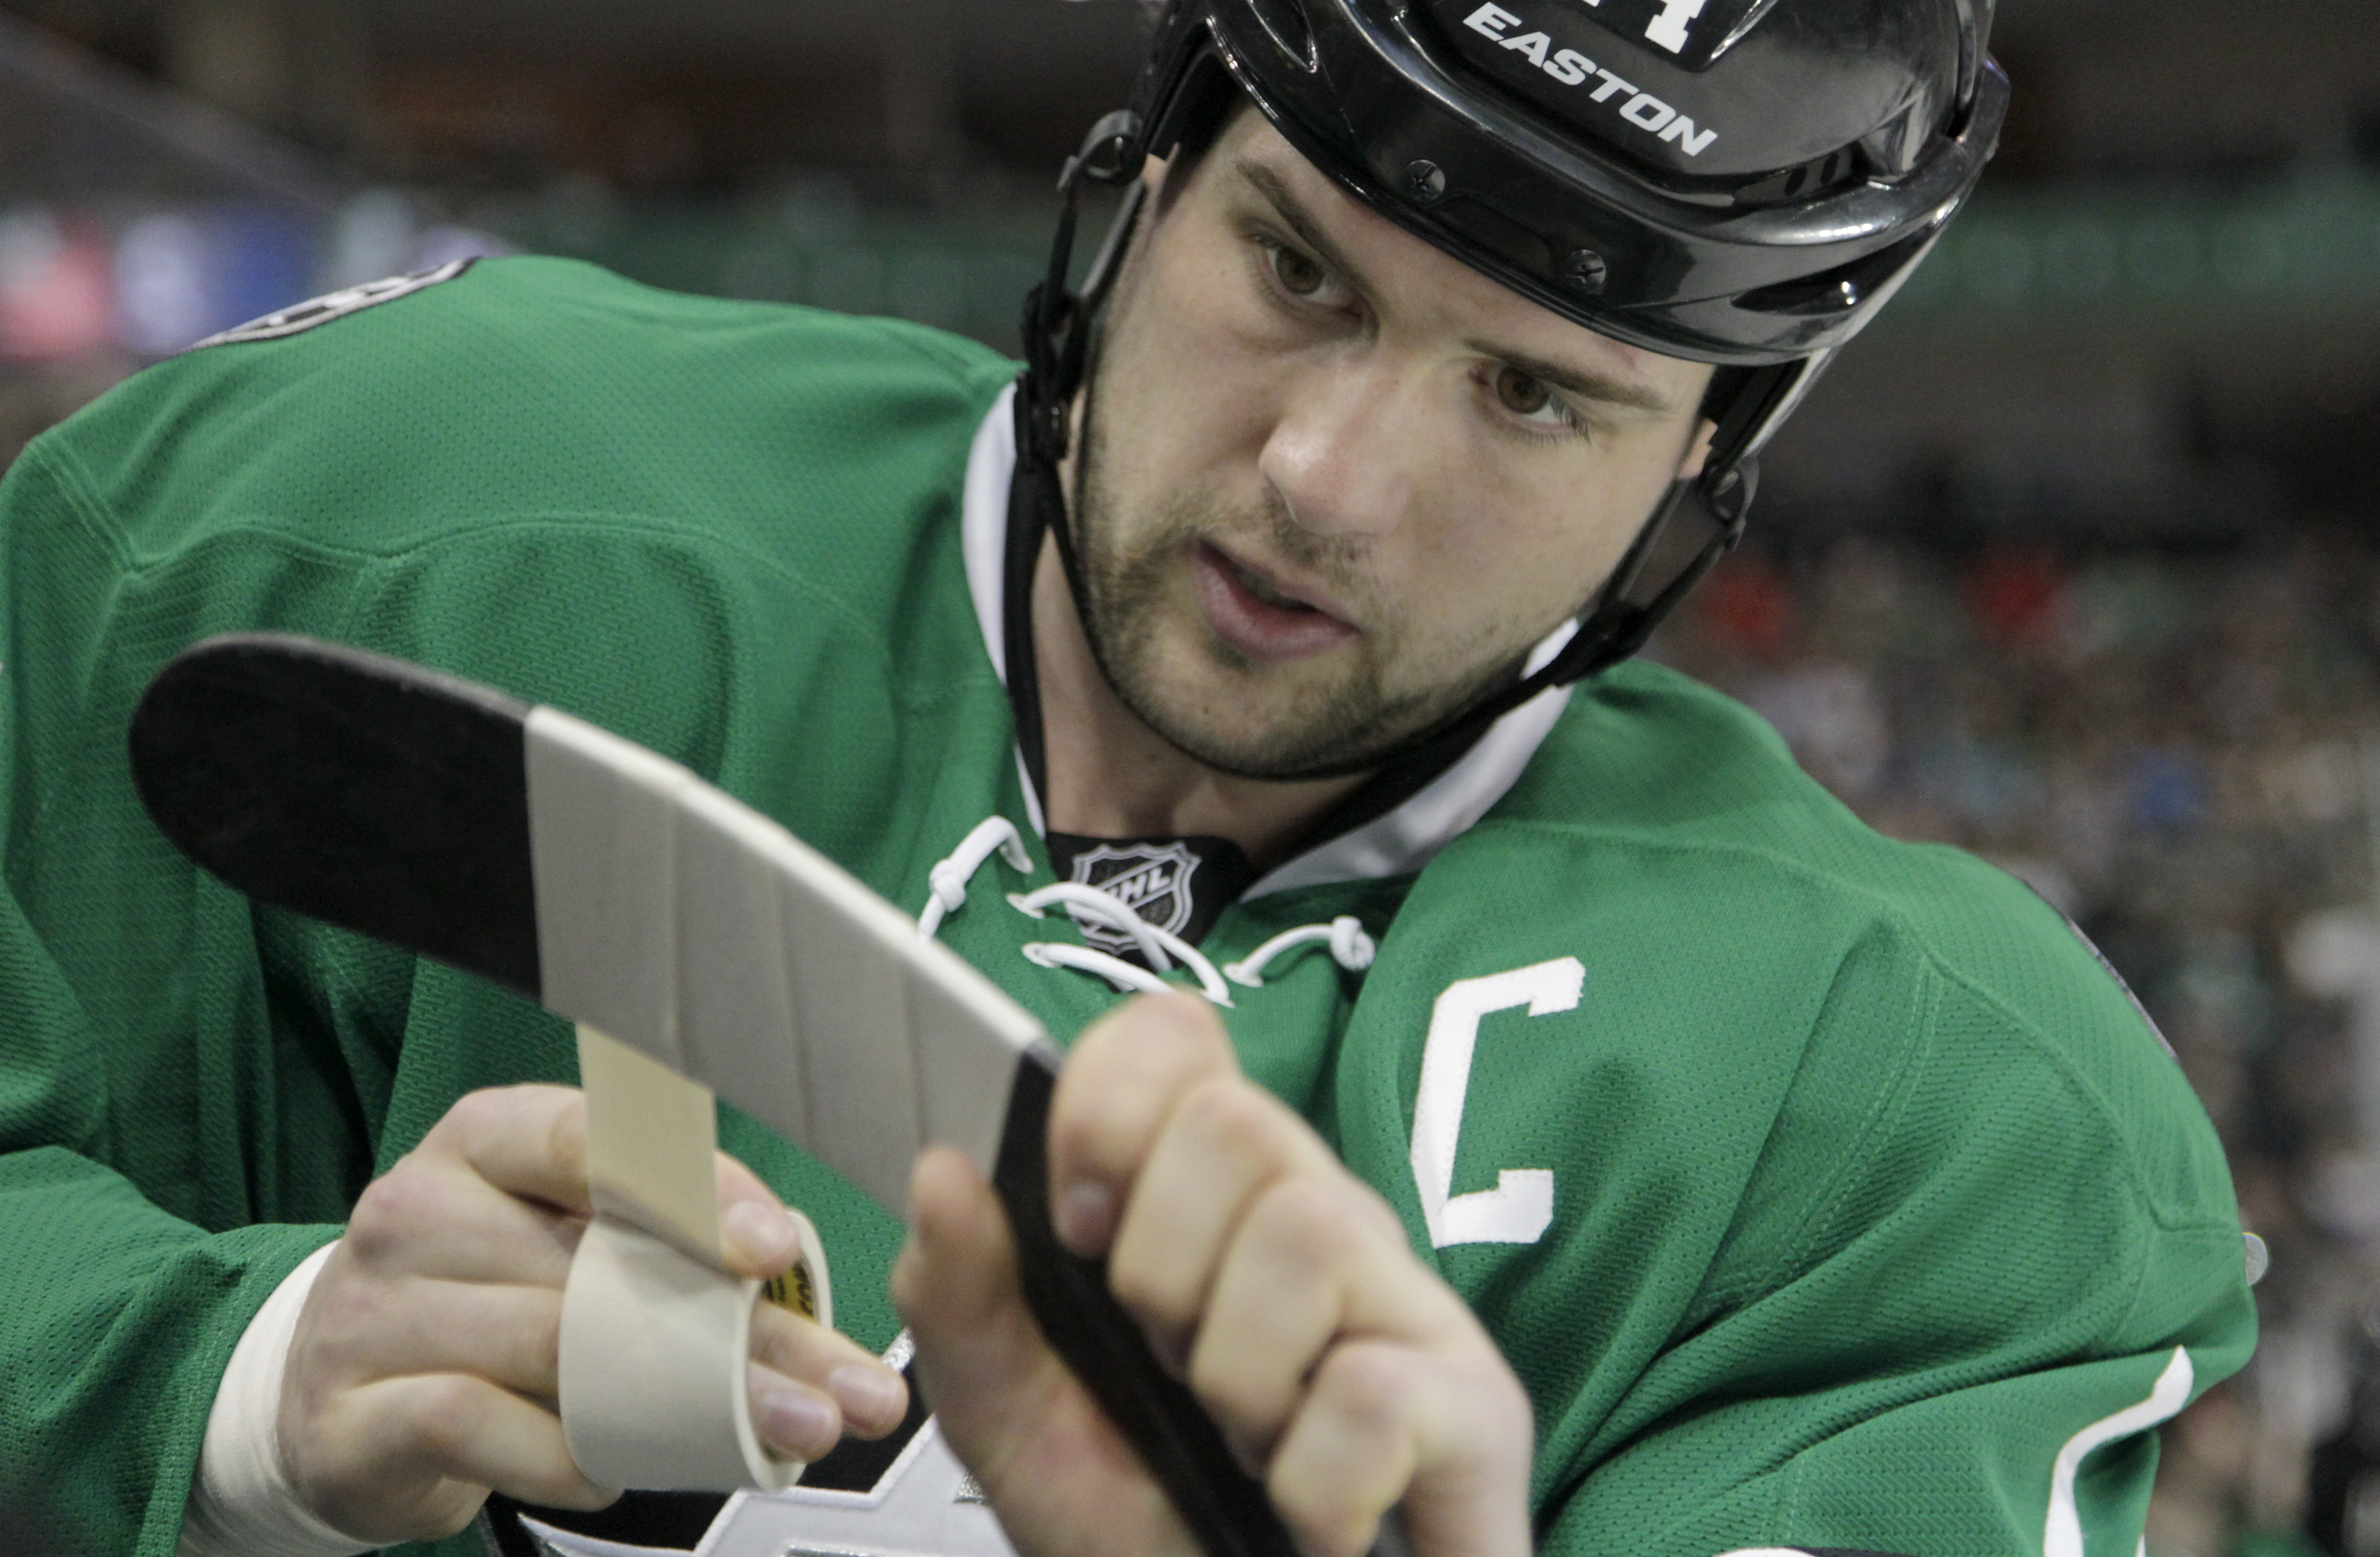 Jamie Benn (Dallas Stars) is playing for team Canada in the 2014